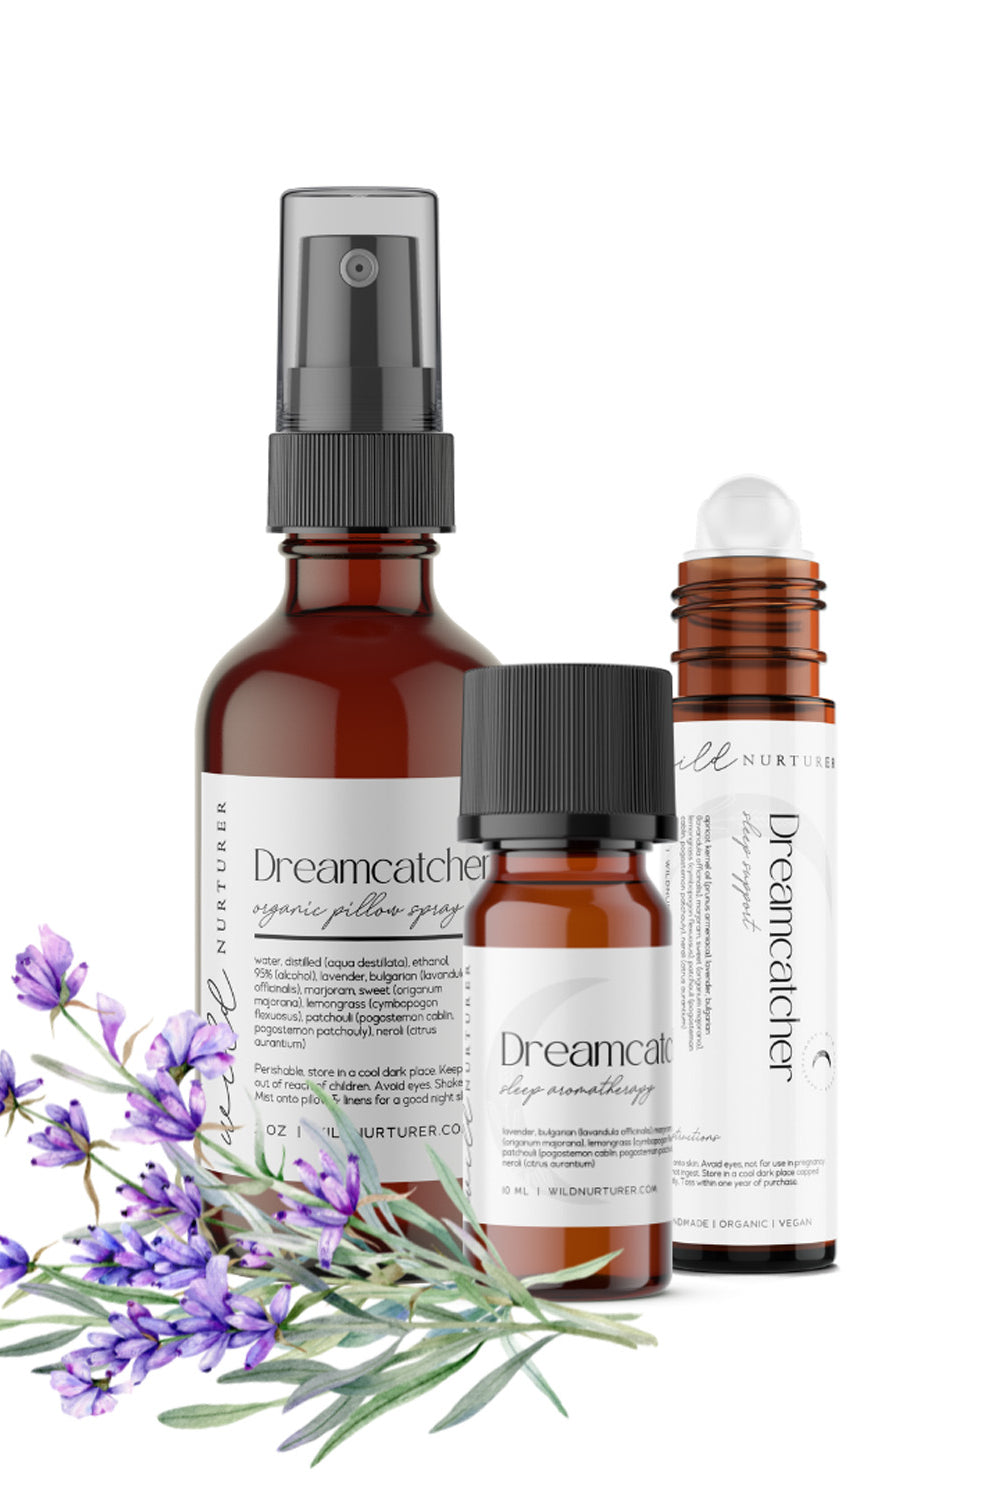 Three bottles of Dreamcatcher Organic Sleep Aromatherapy products with purple flowers on a white background by Wild Nurturer Aromatherapy.